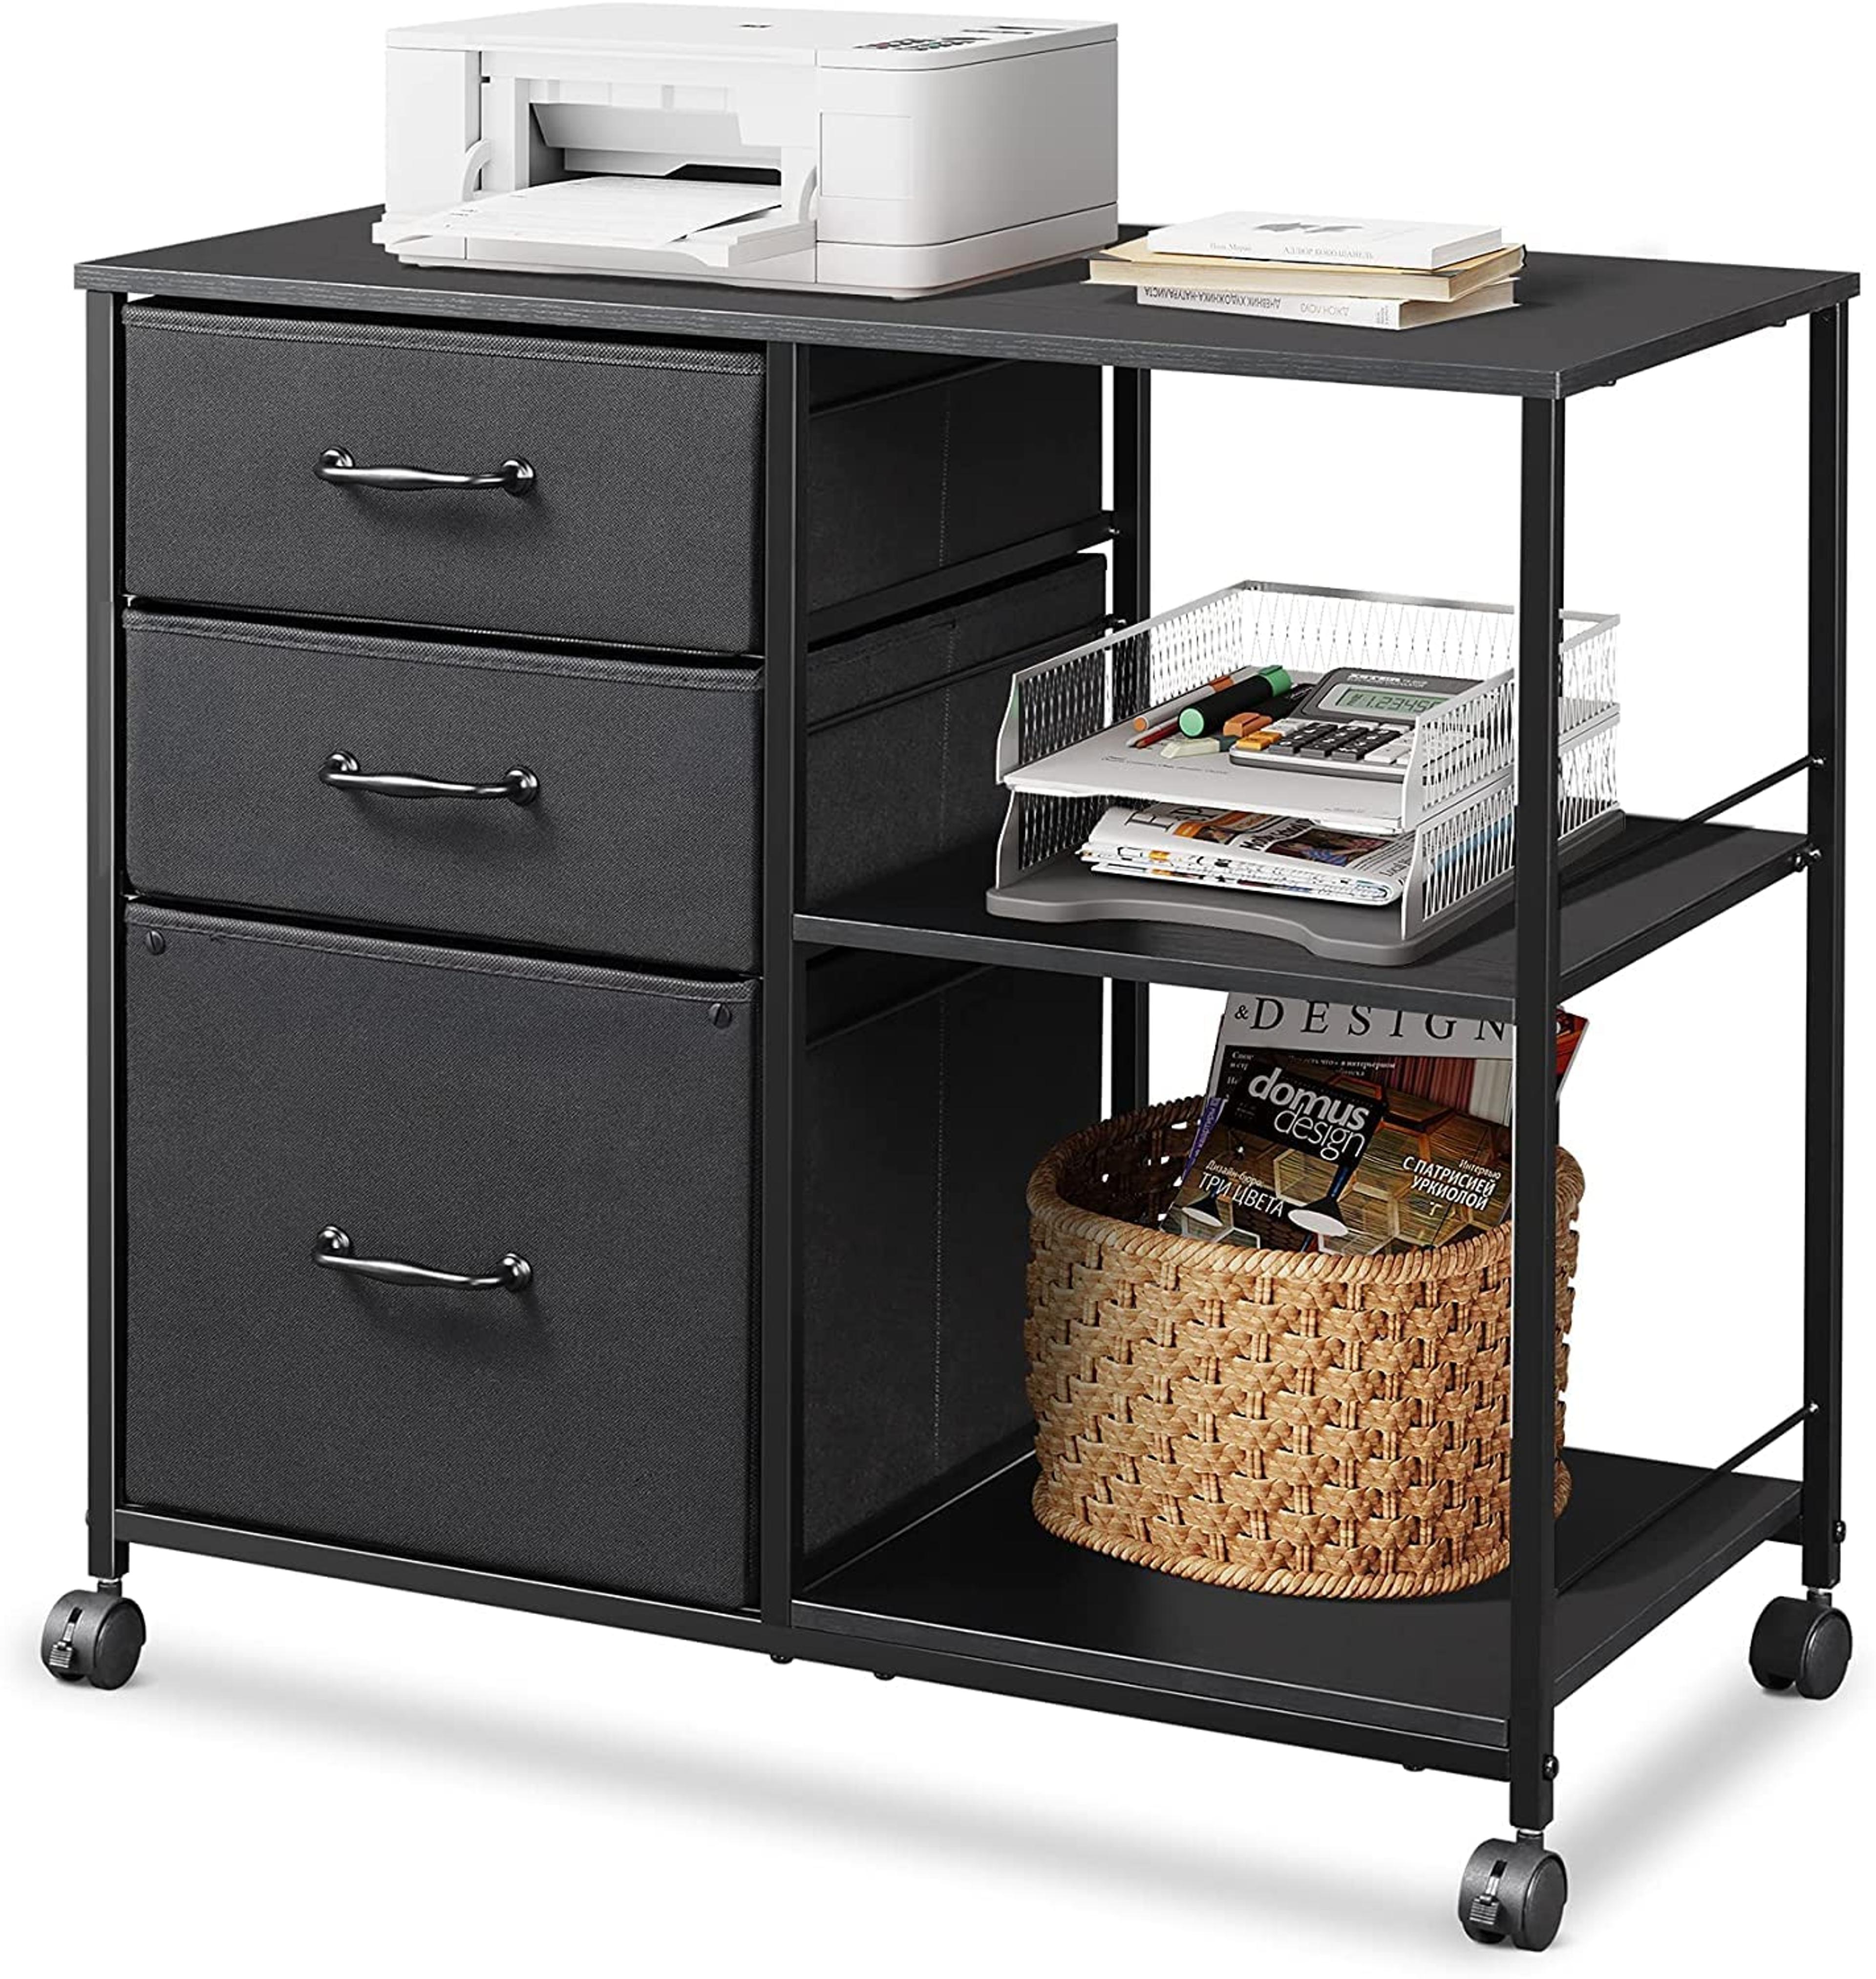 Amazon.com: DEVAISE 3 Drawer Mobile File Cabinet, Rolling Printer Stand with Open Storage Shelf, Fabric Lateral Filing Cabinet fits A4 or Letter Size for Home Office, Black